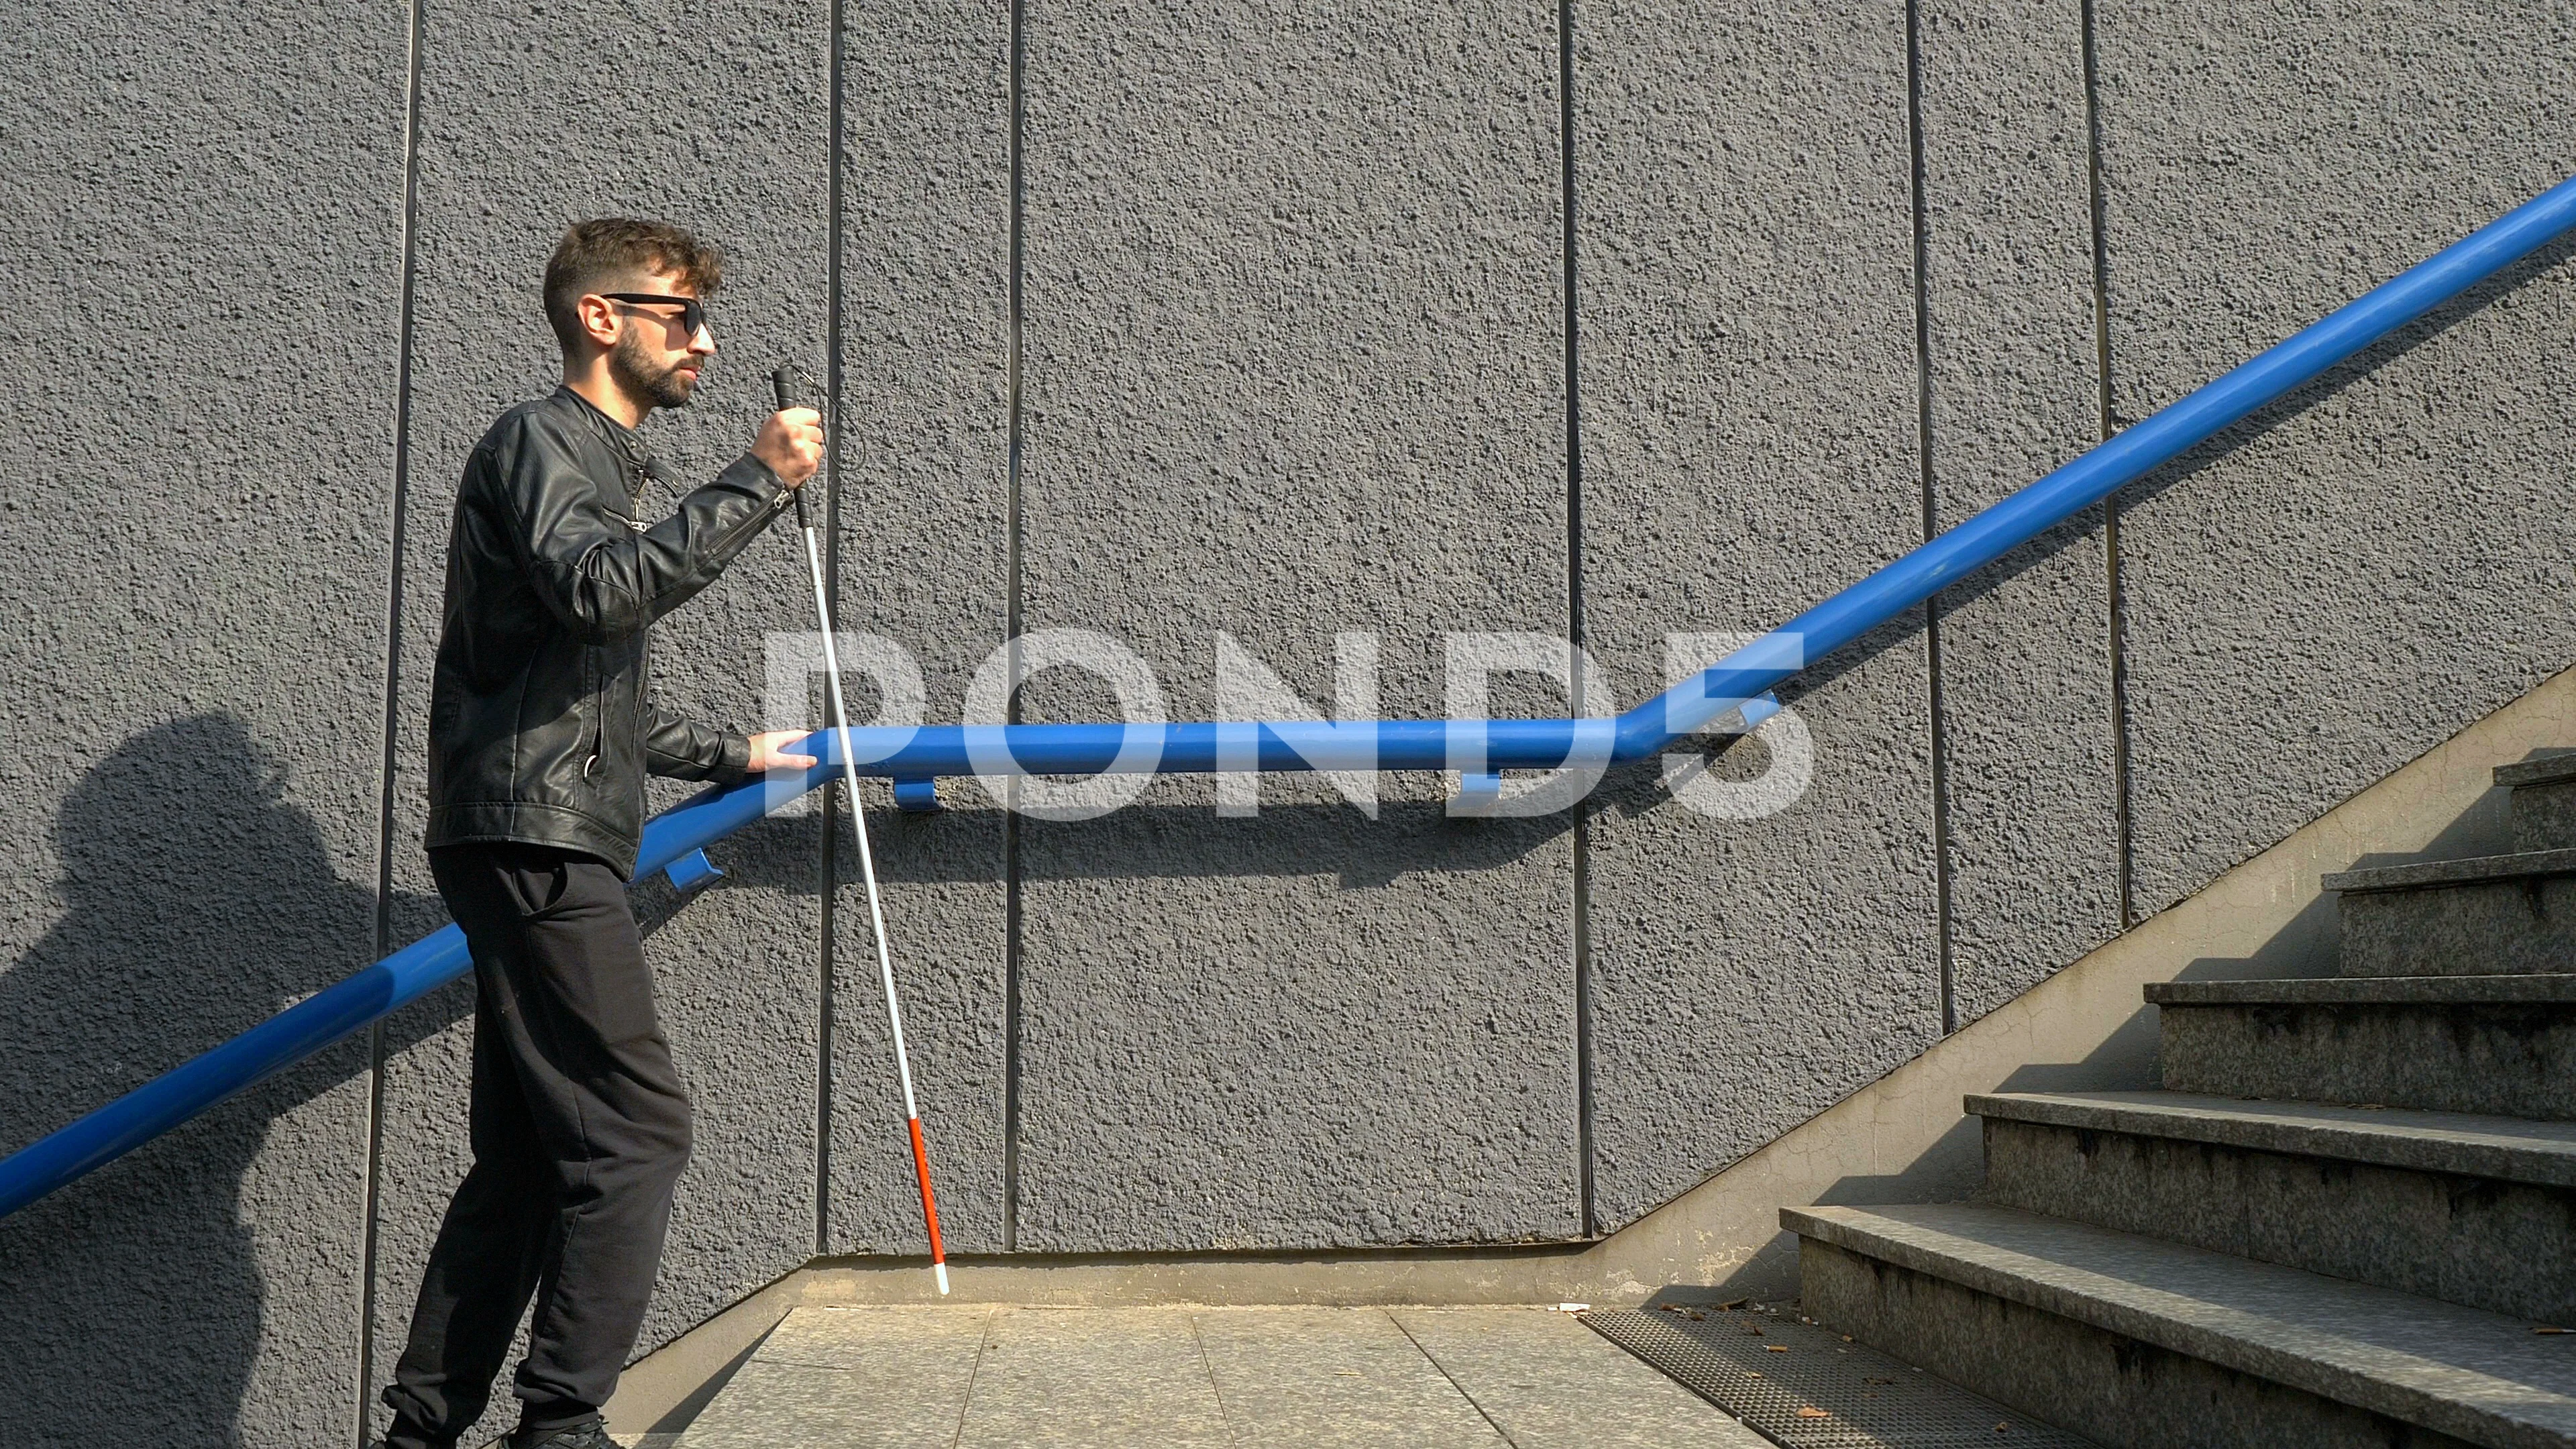 Blind man using his cane on the stairs - Stock Image - F012/4730